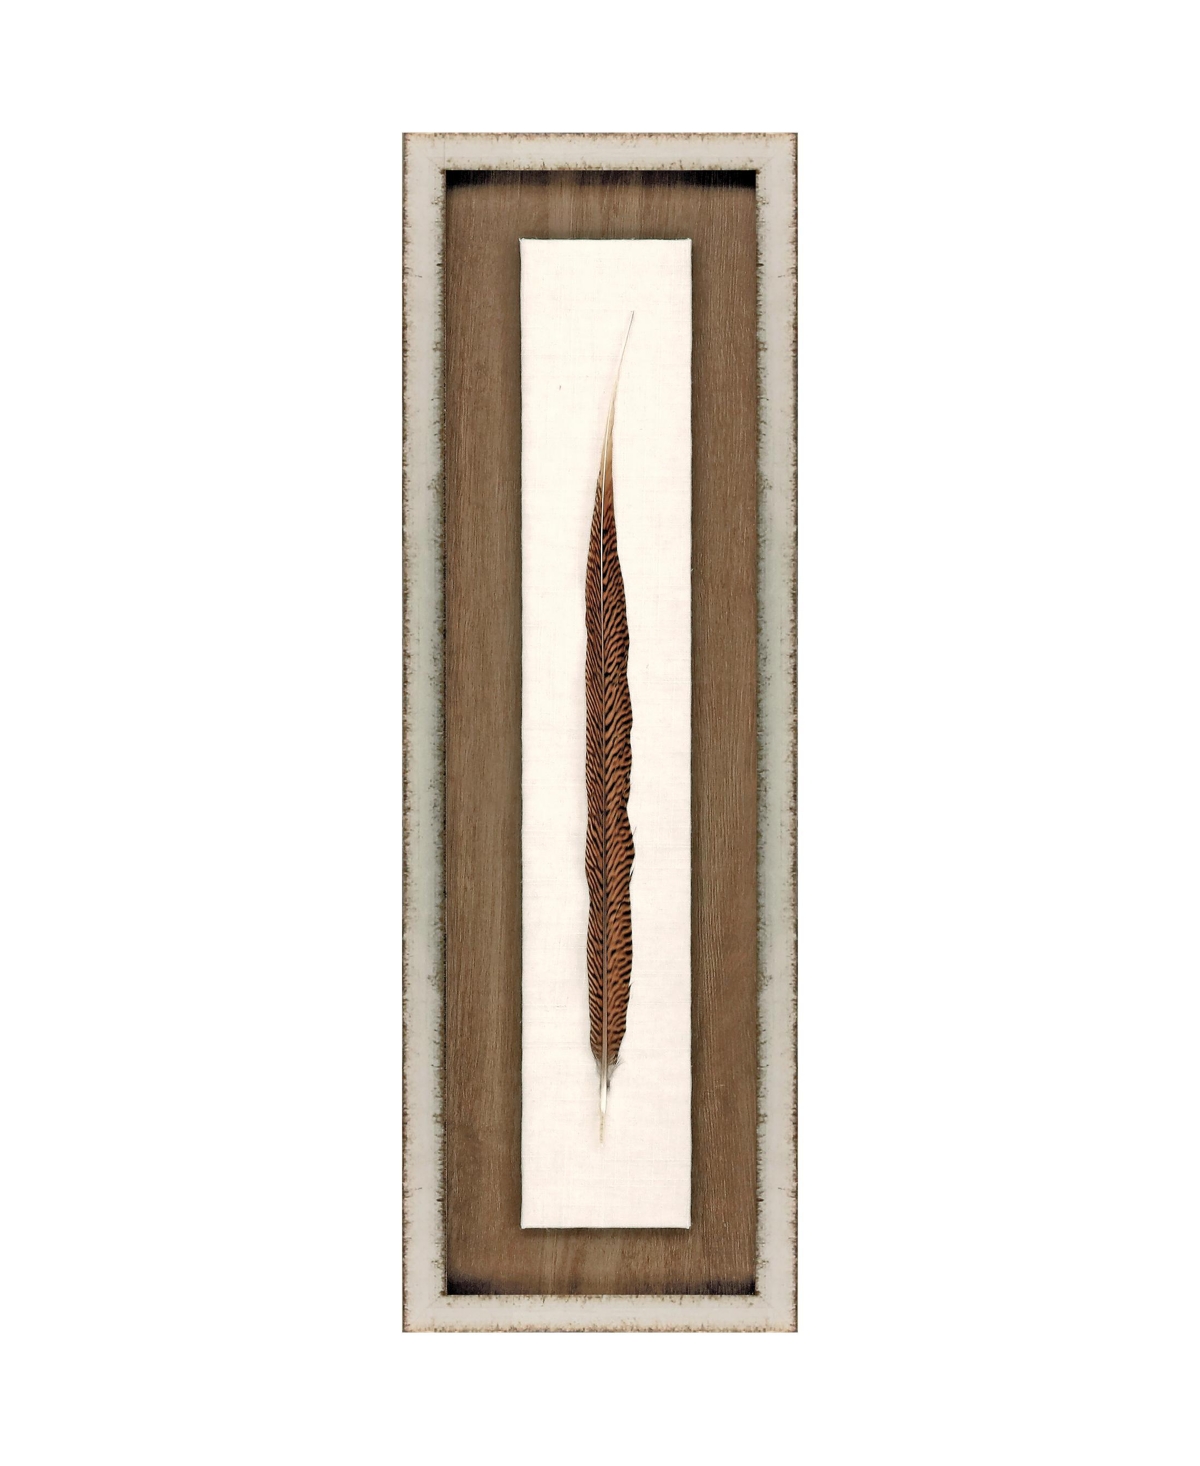 Paragon Picture Gallery Pheasant Feather Framed Art In Brown